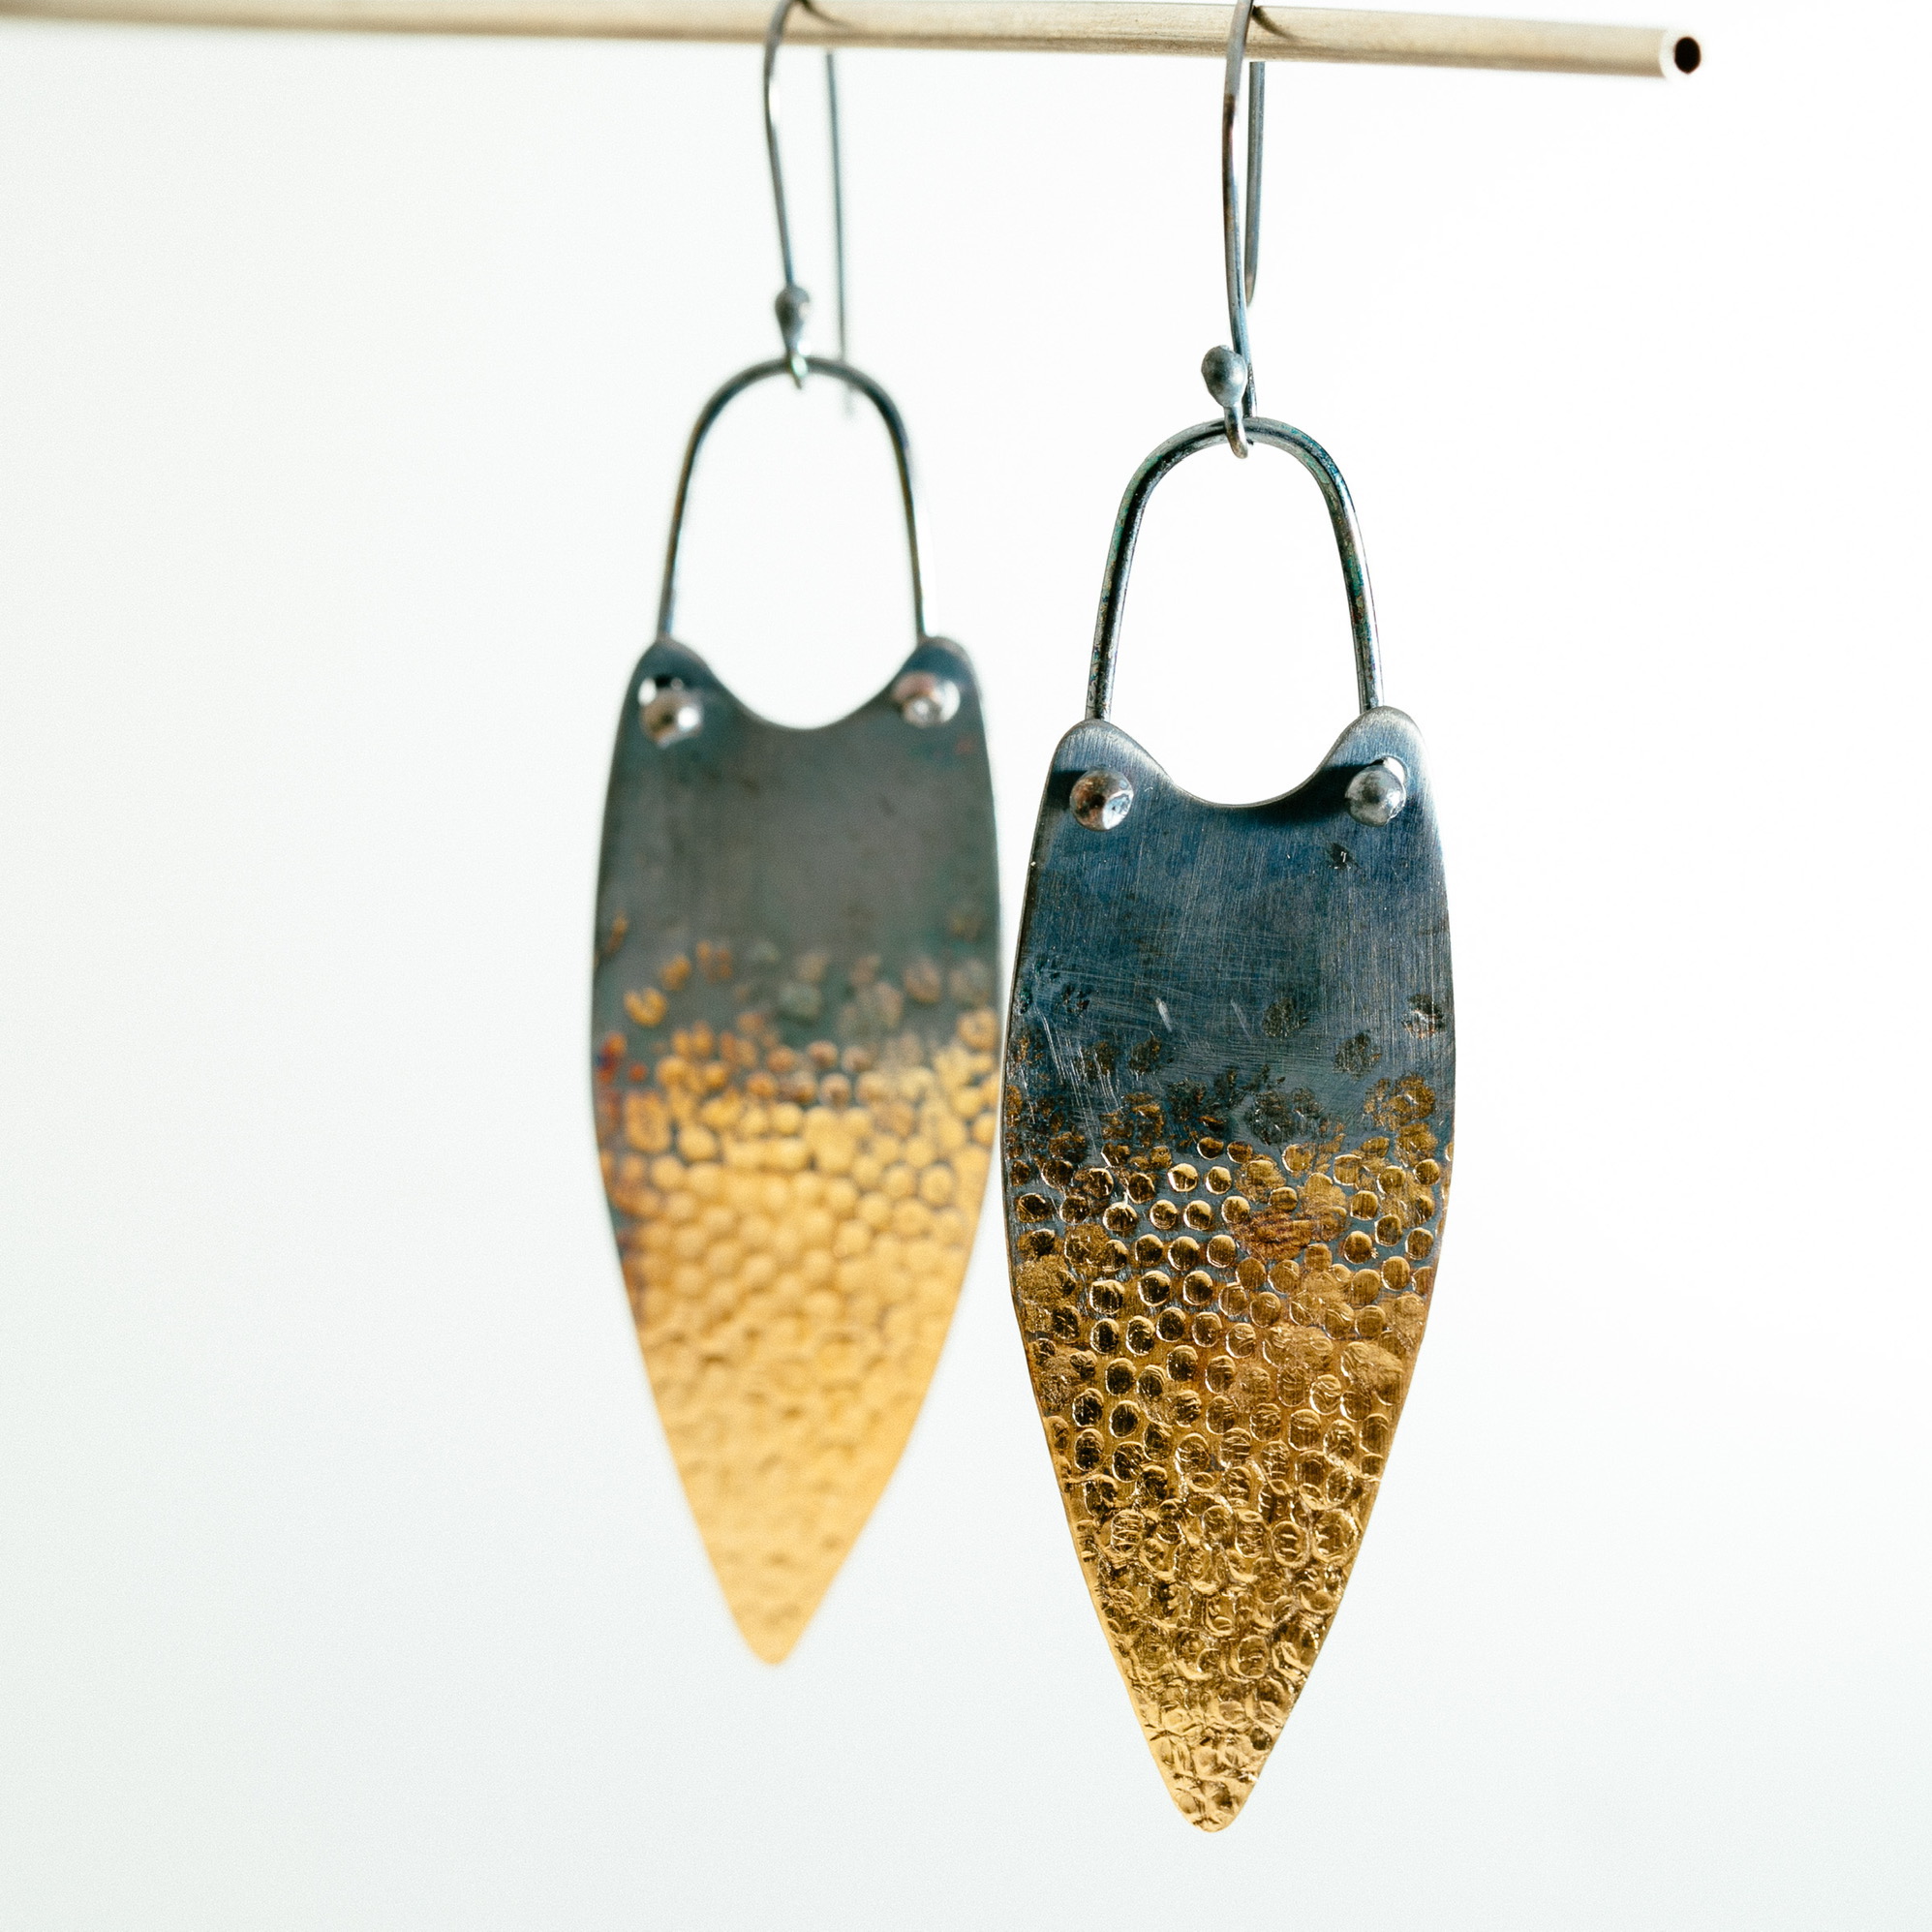 Statement silver and gold earrings